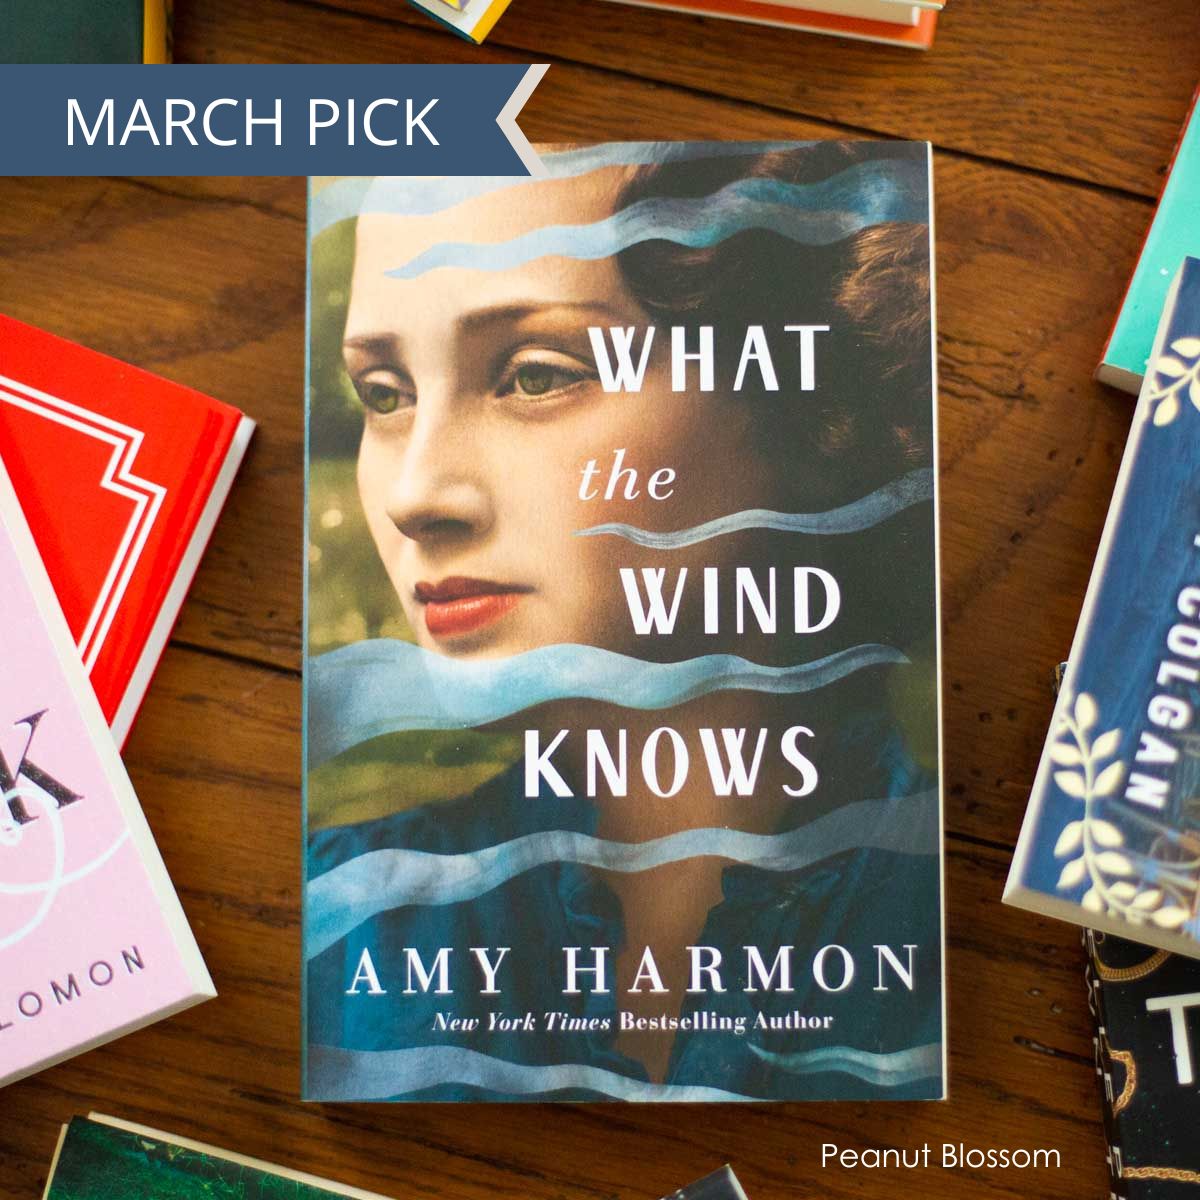 A cover of the book What the Wind Knows by Amy Harmon